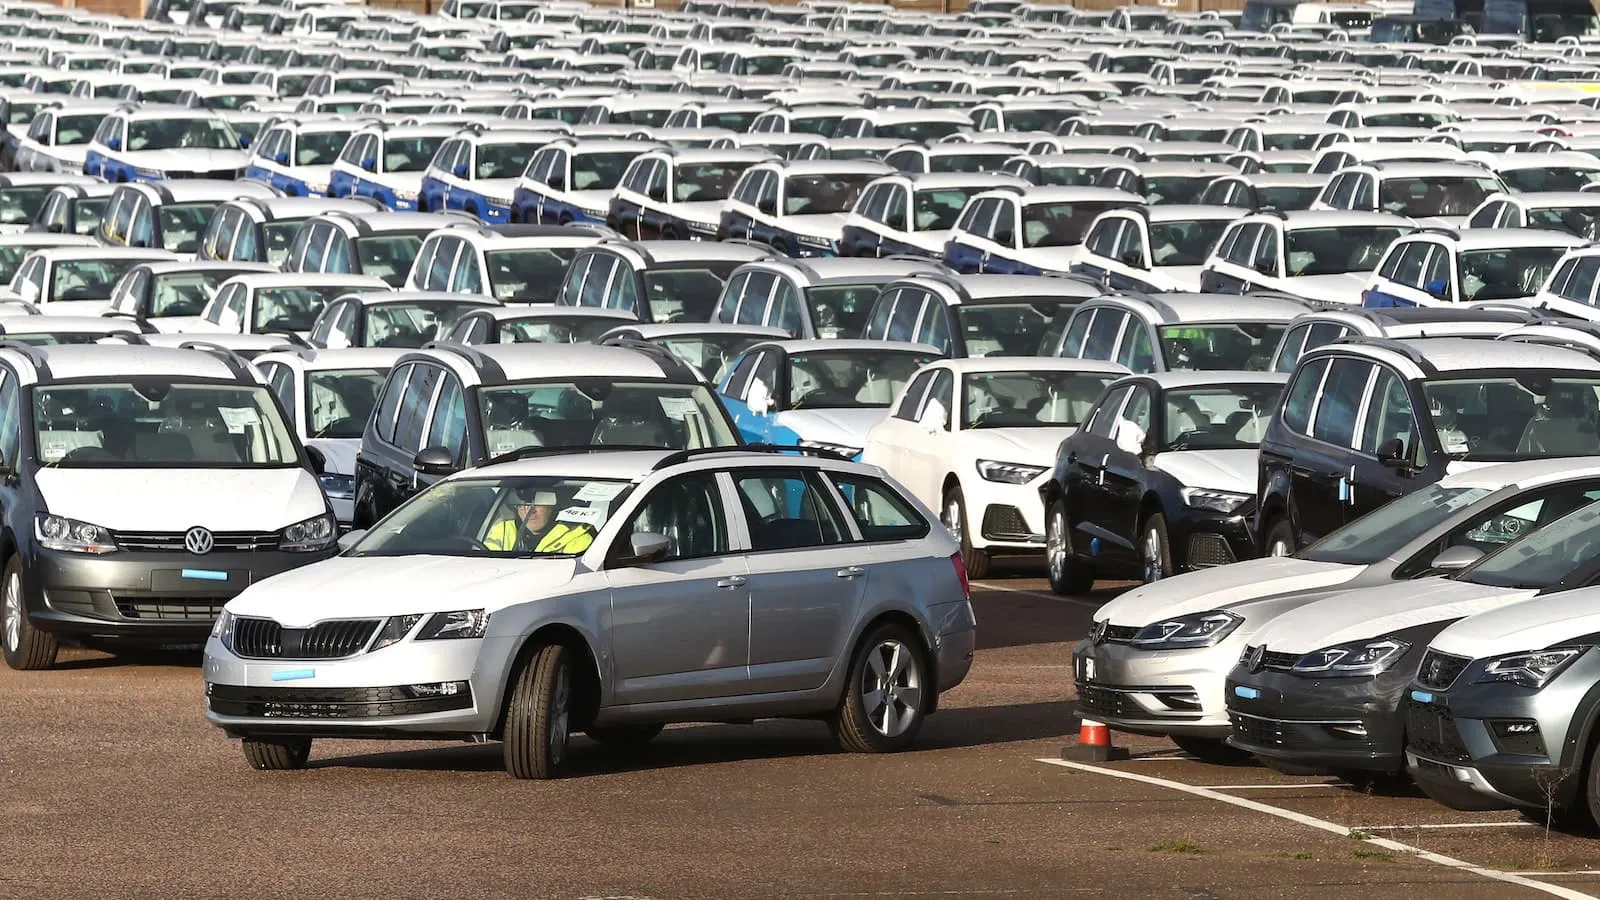 New car sales collapse across Europe - March 2020